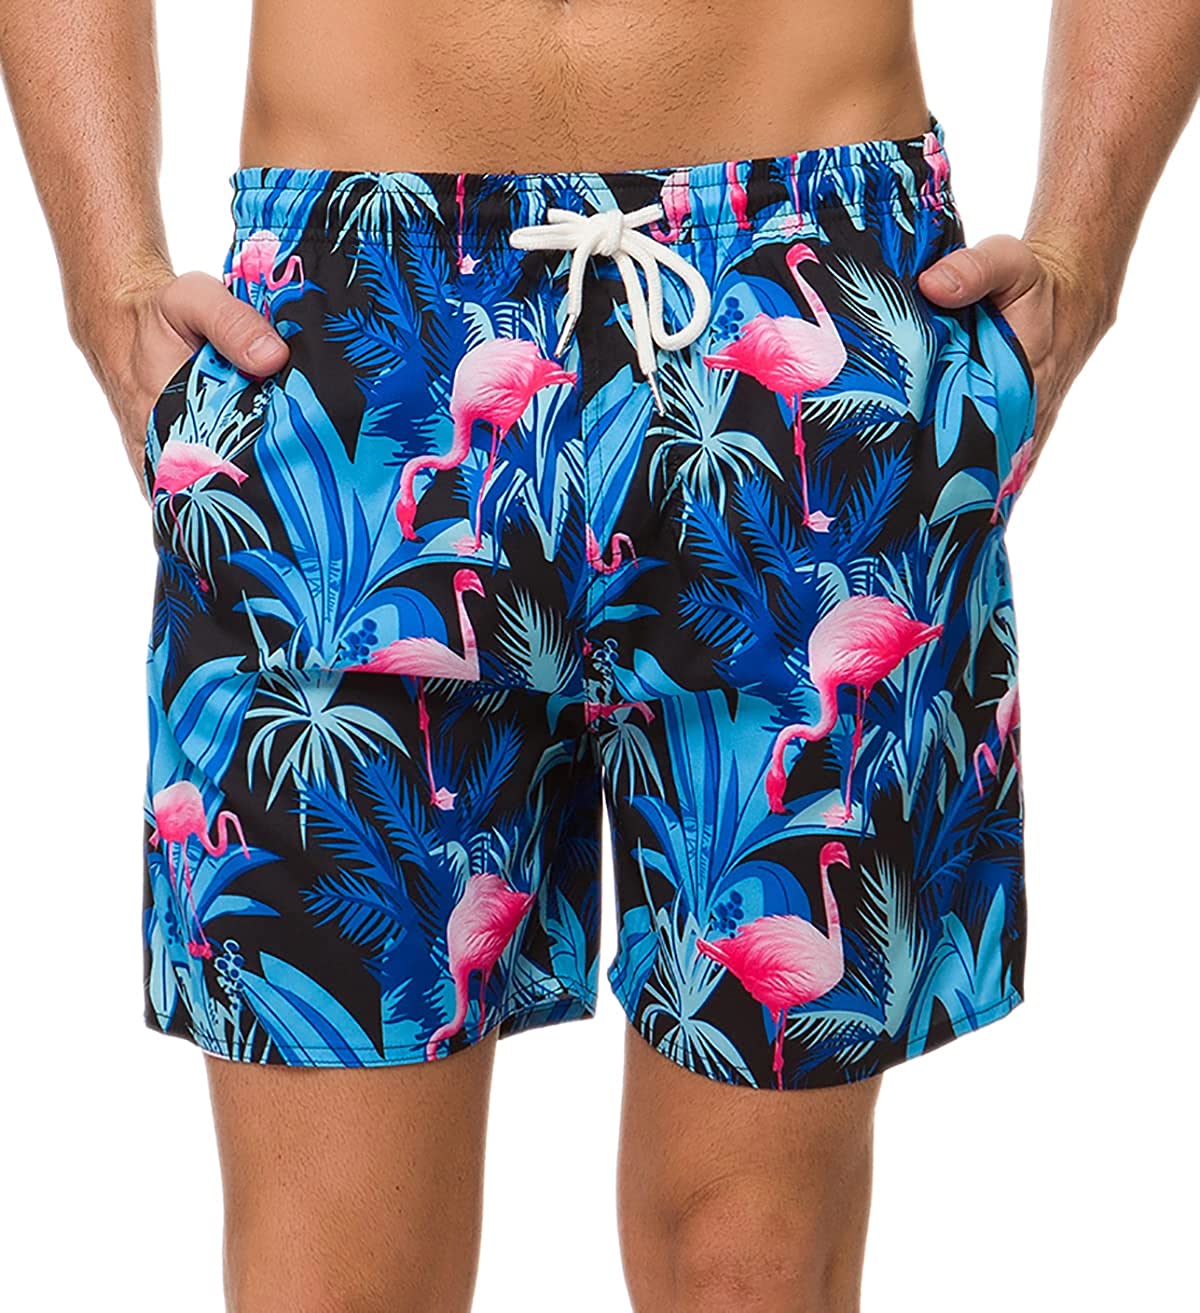 Janmid Men's Swim Trunks Quick Dry Beach Shorts with Pockets